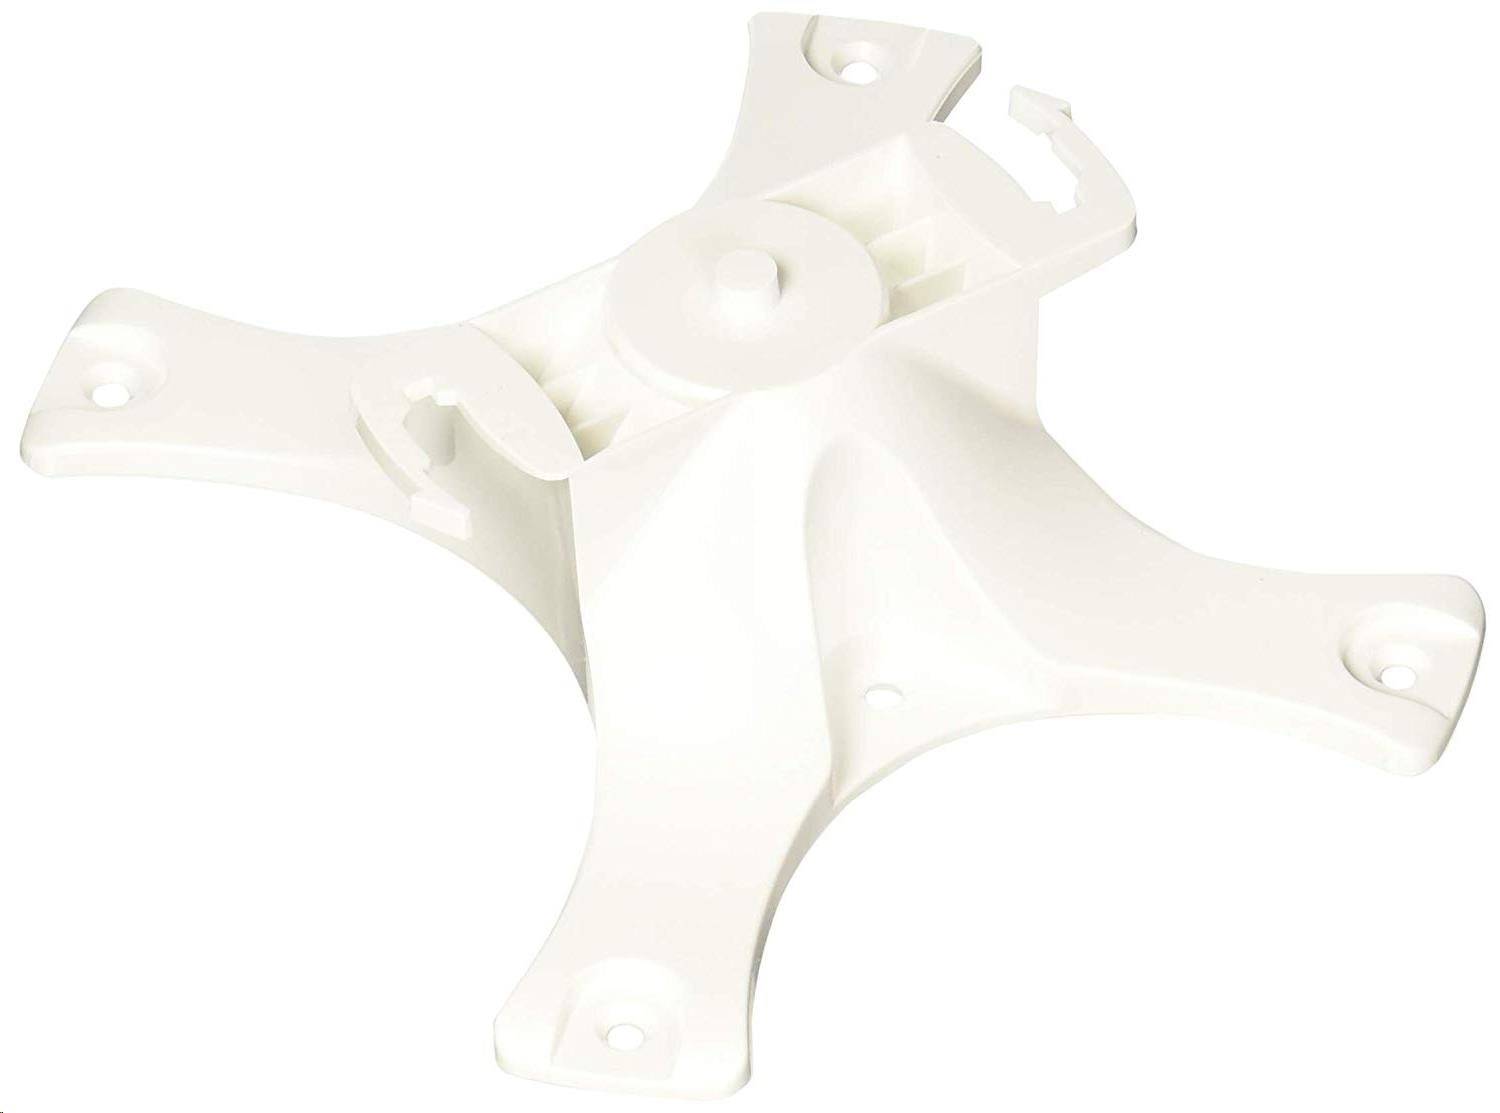 Aruba Access Point Mount Kit (basic, flat surface). Contains 1x flat surface wall/ceiling mount bracket (color white).